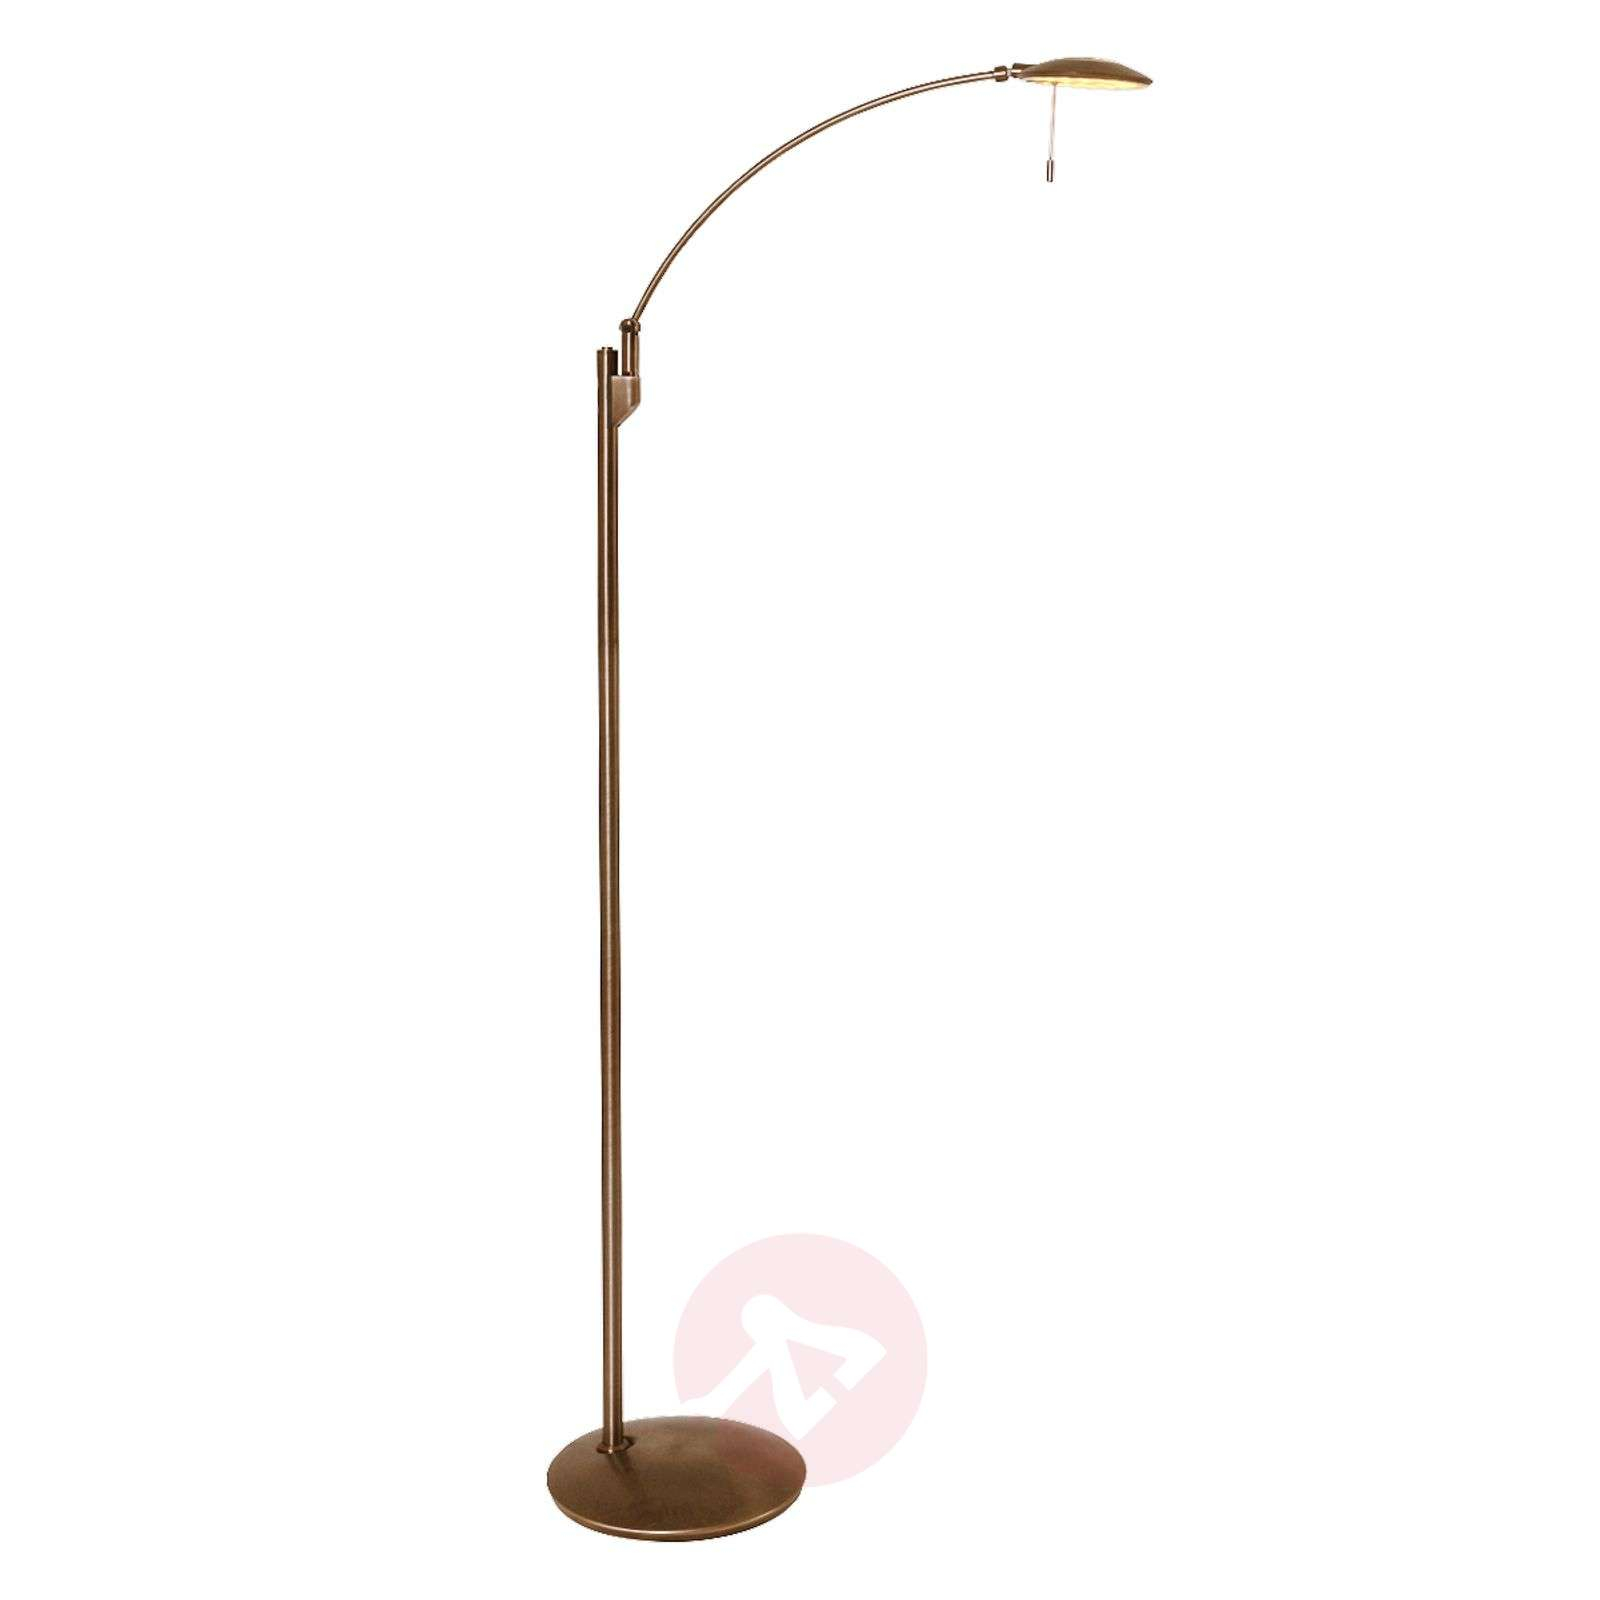 Dimmable Adjustable Led Floor Lamp Zenith Bronze within sizing 1600 X 1600